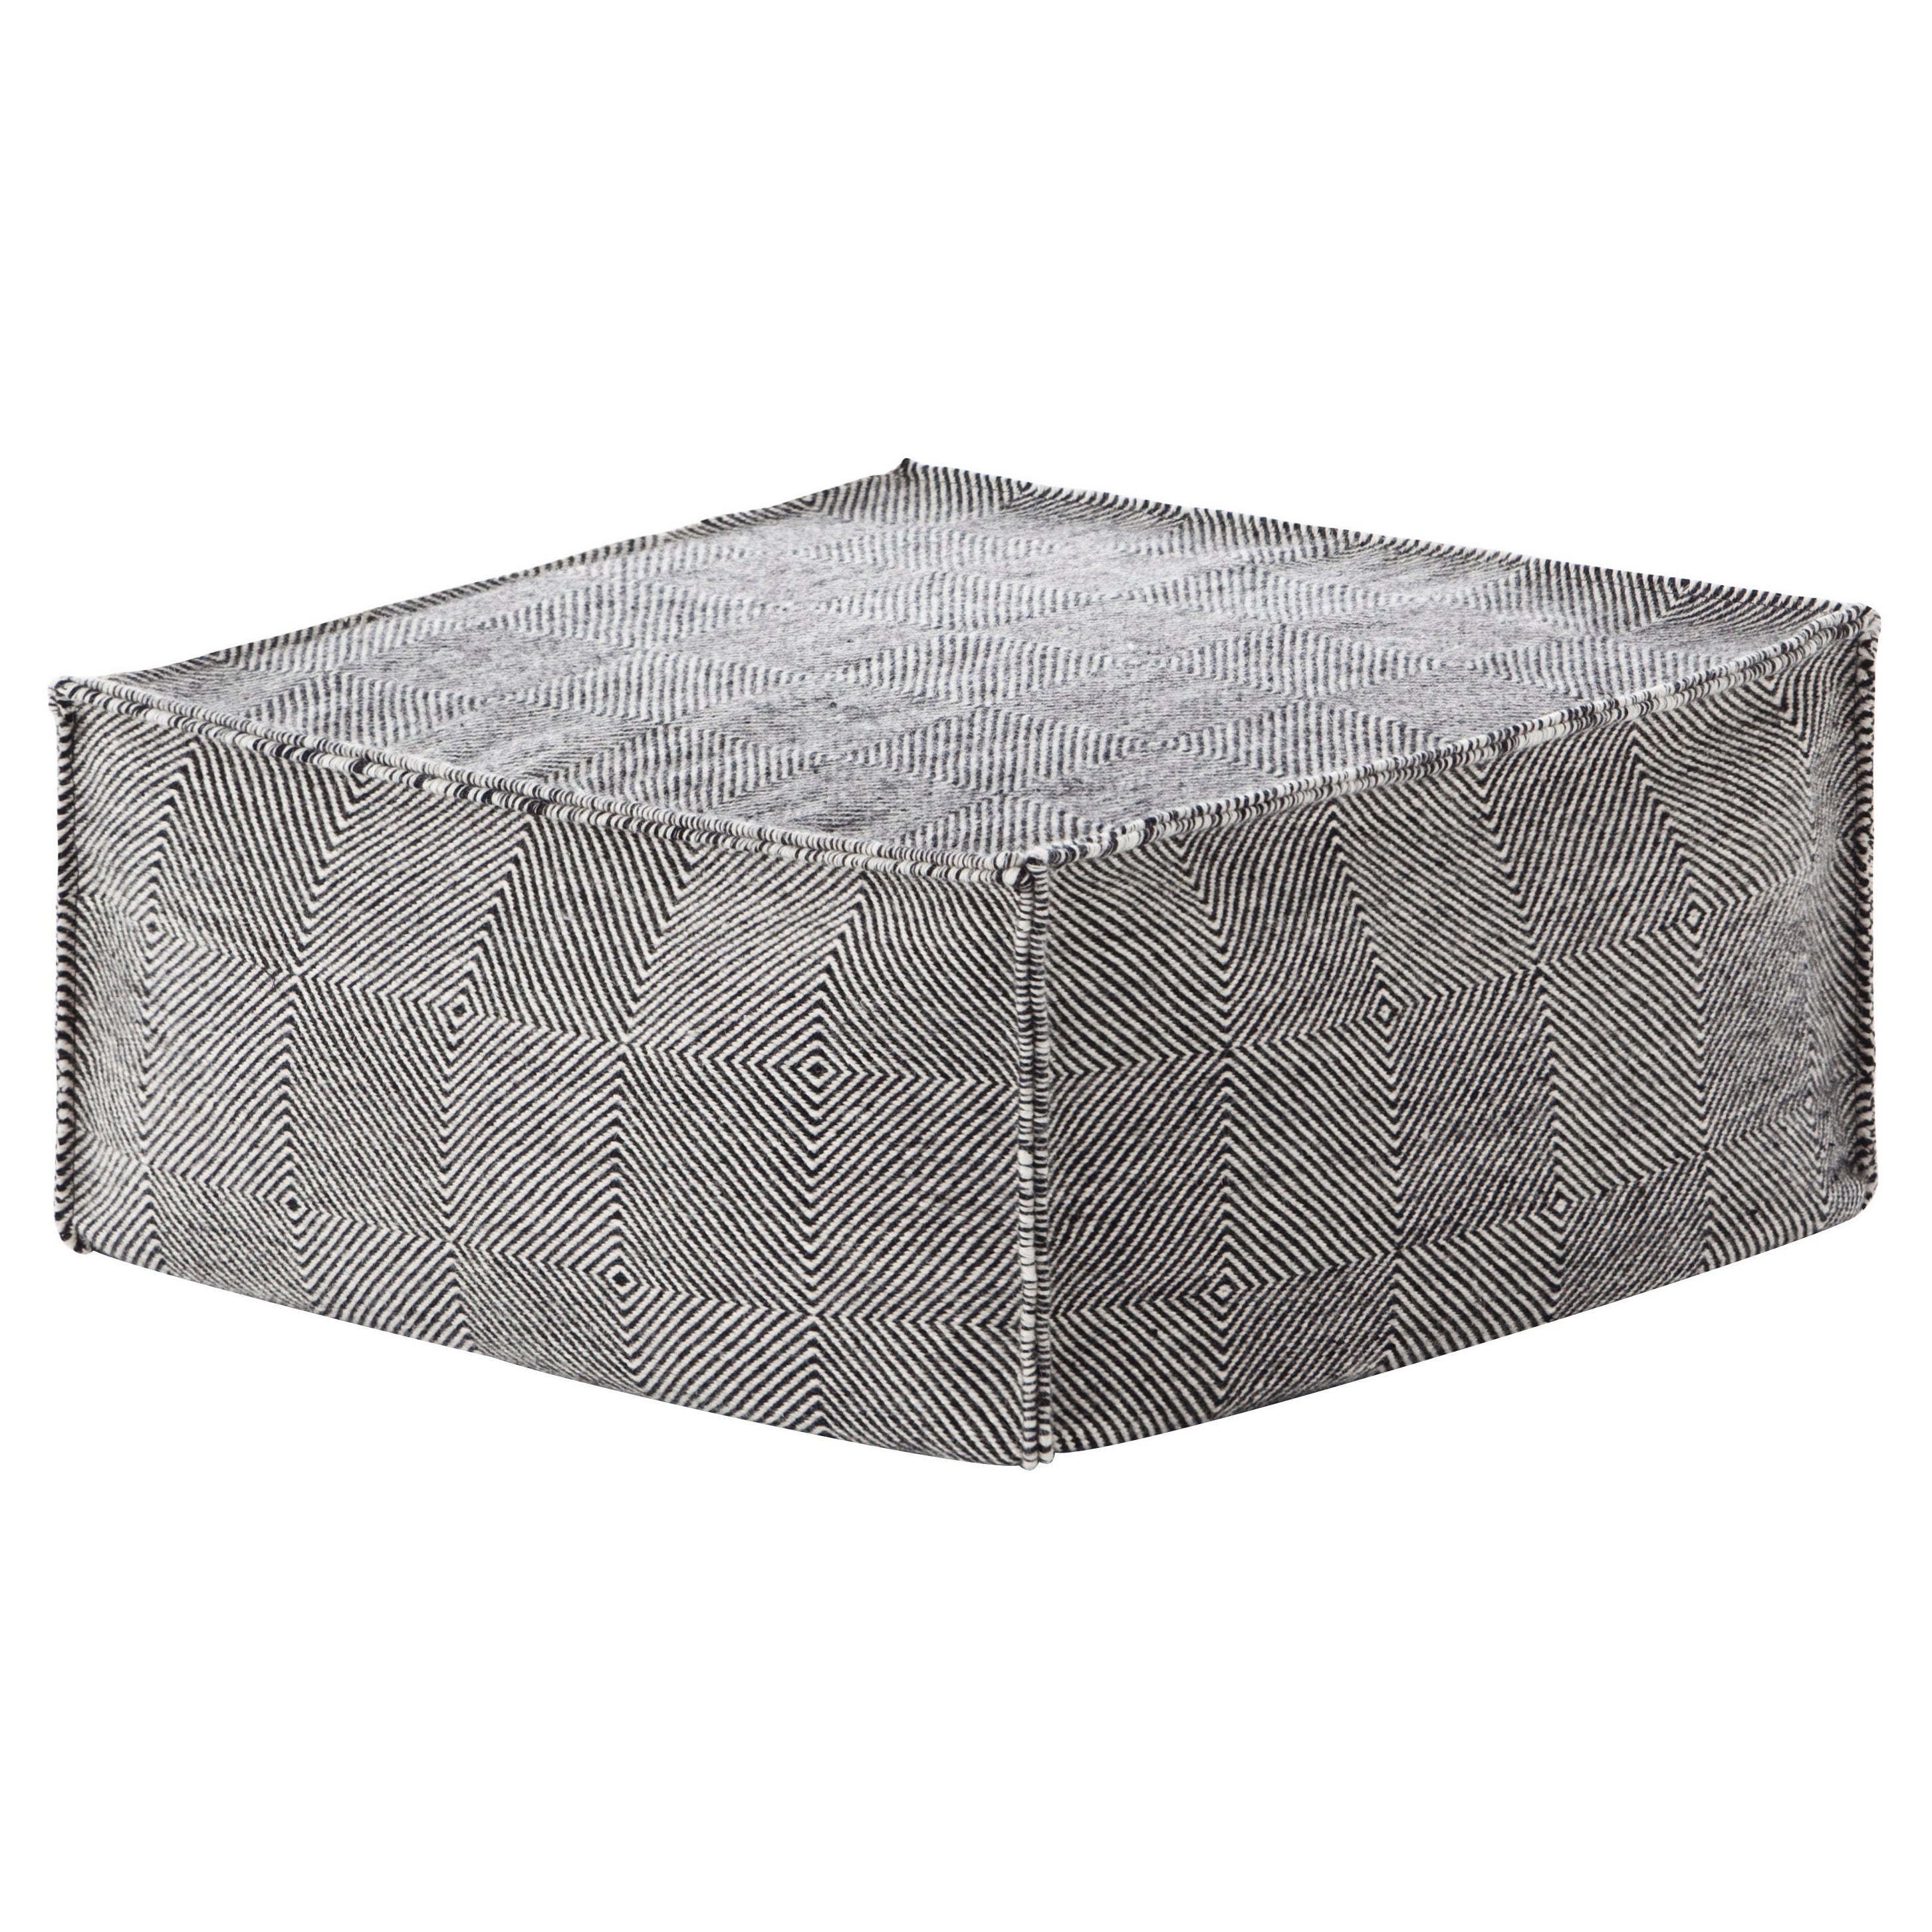 GAN Spaces Sail Square Pouf in Black by Héctor Serrano For Sale